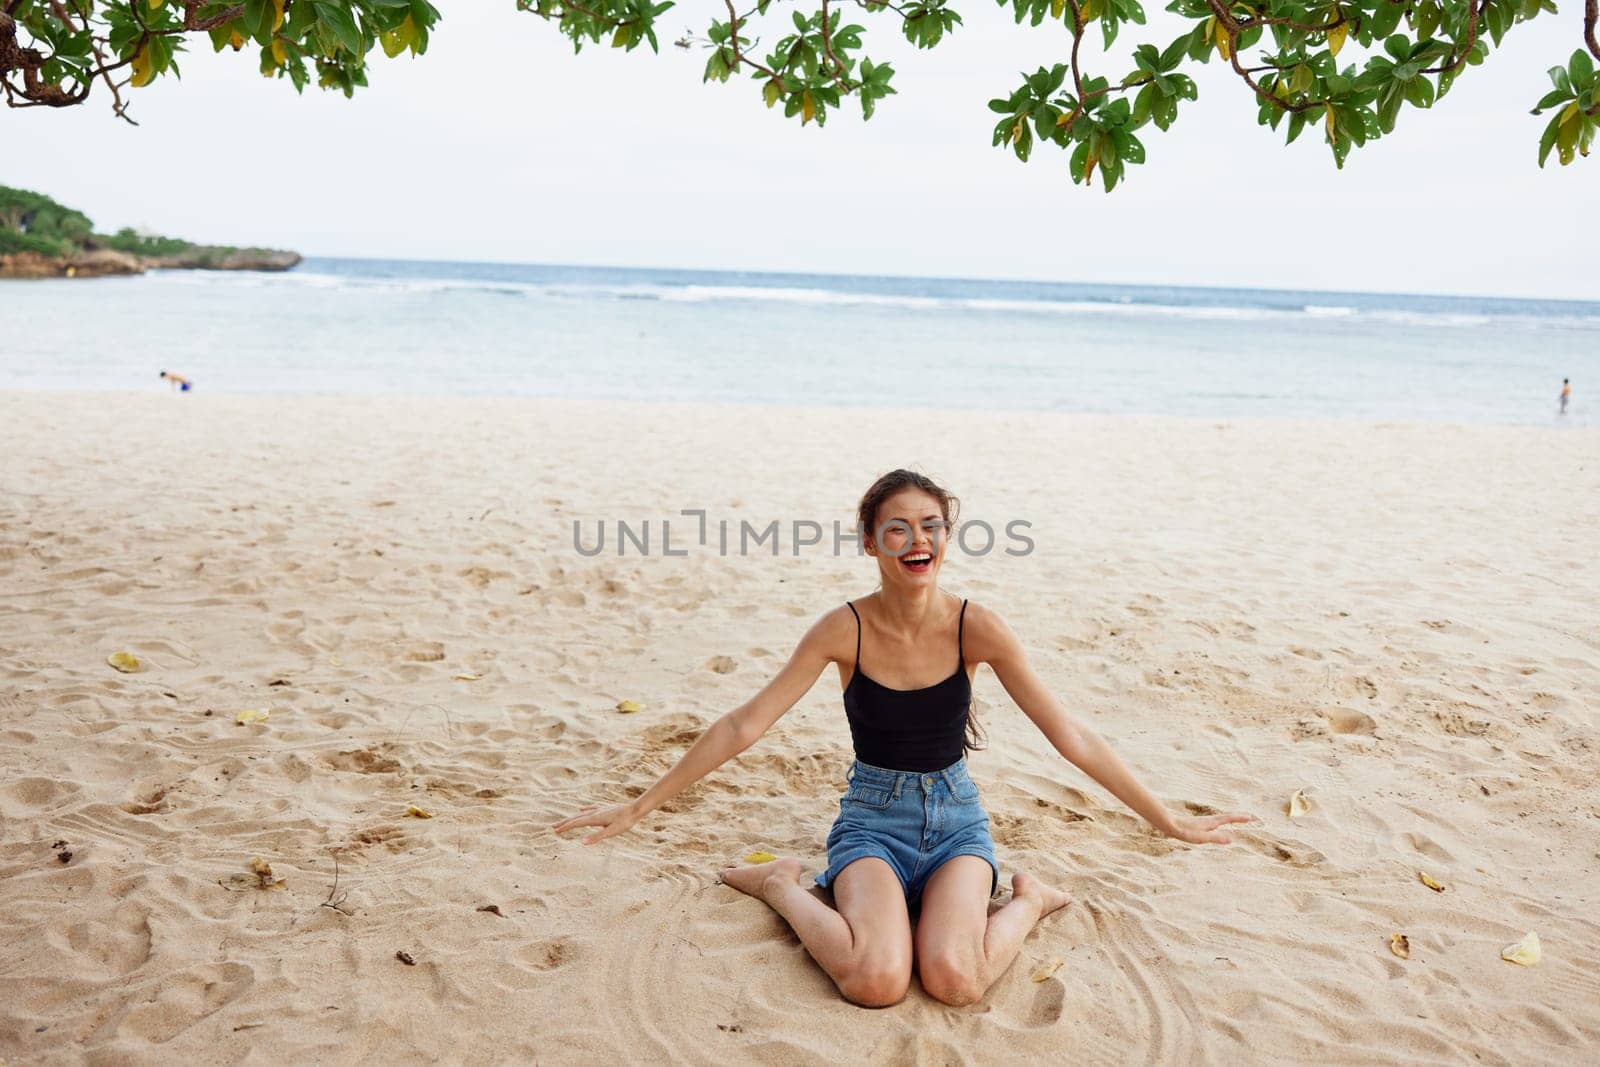 freedom woman model nature sea vacation sun hair sexy fashion sitting smile long sand beauty ocean female travel happy lifestyle natural beach